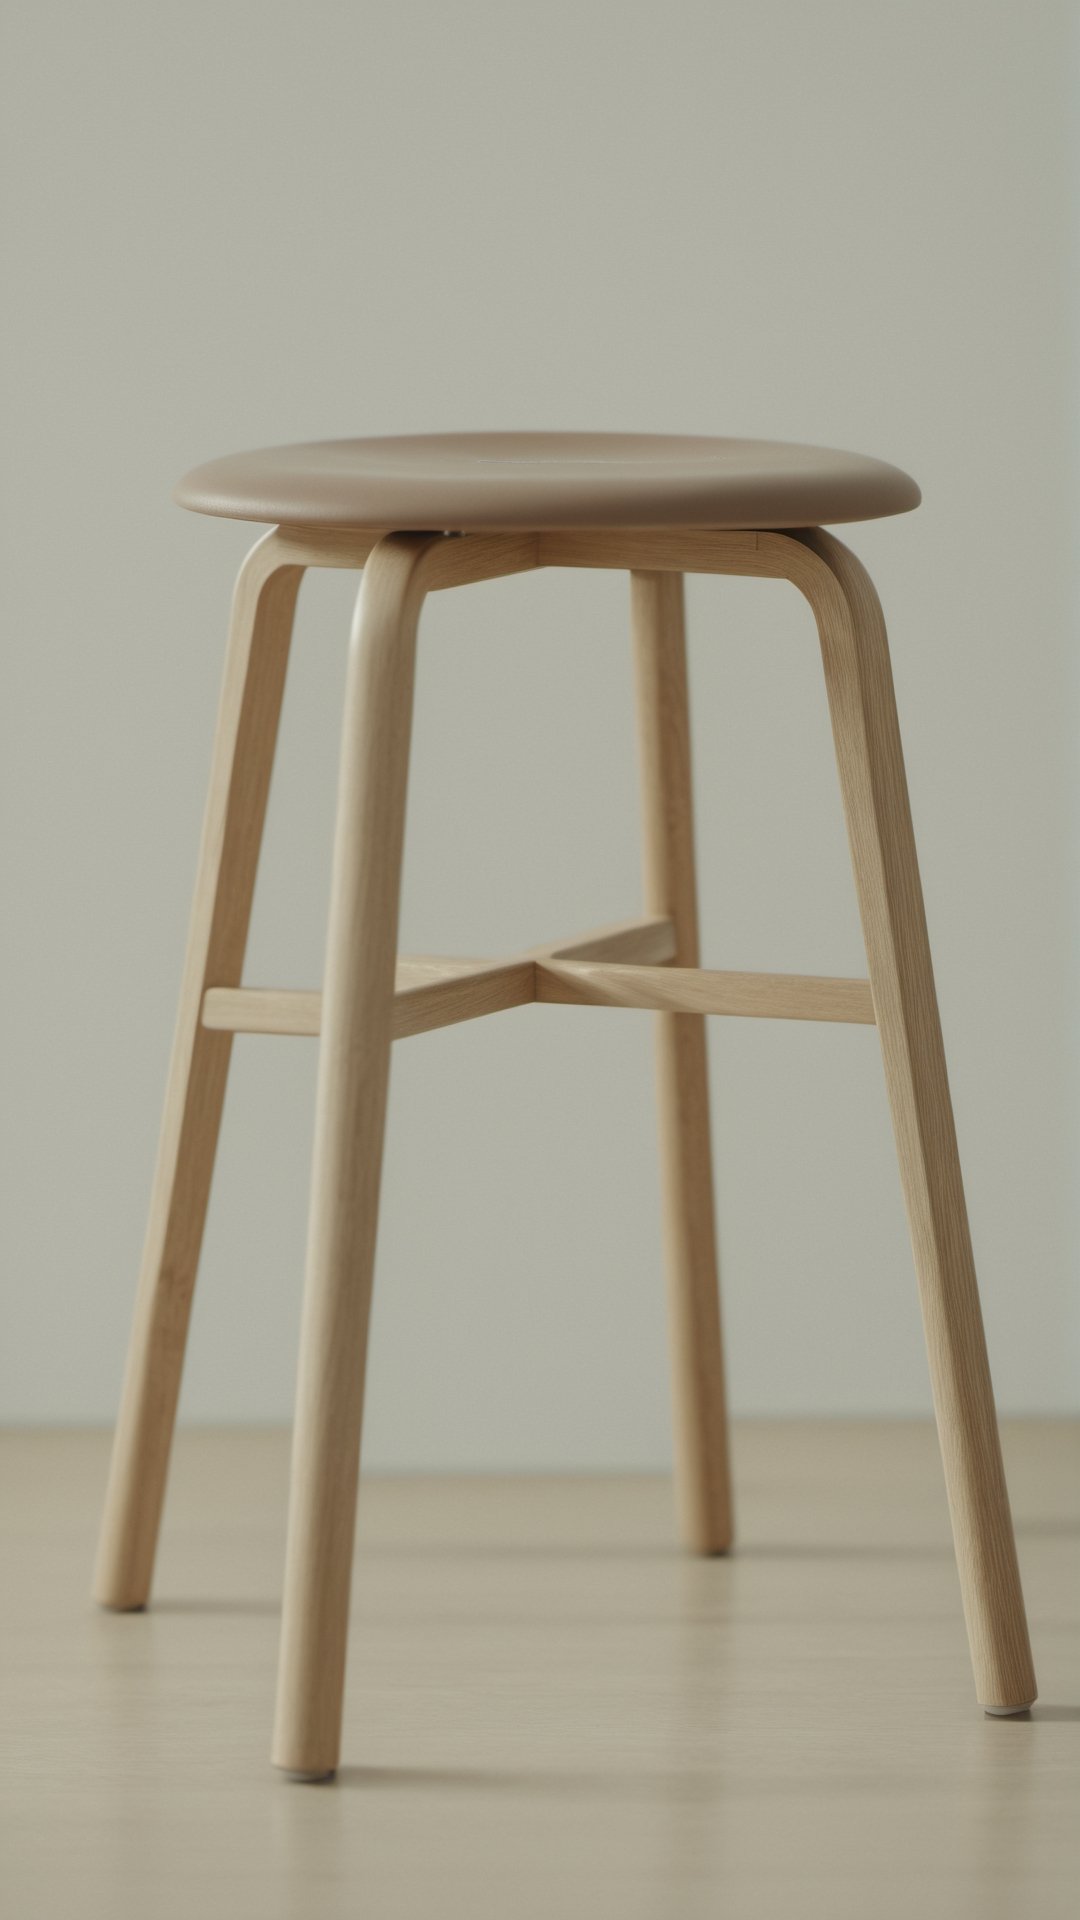 (best quality, high resolution, ultra high resolution, masterpiece, realistic, extremely detailed photography, 8K wallpaper, intricate details, film grains), high definition photorealistic photography of a Stool design concept, Completely made of wood with a Scandinavian style, rounded corners, fine carpentry and pastel colors. A photographic scene designed with advanced photography parameters, CGI and VFX, in high definition, guaranteeing impeccable execution and a high level of image complexity.